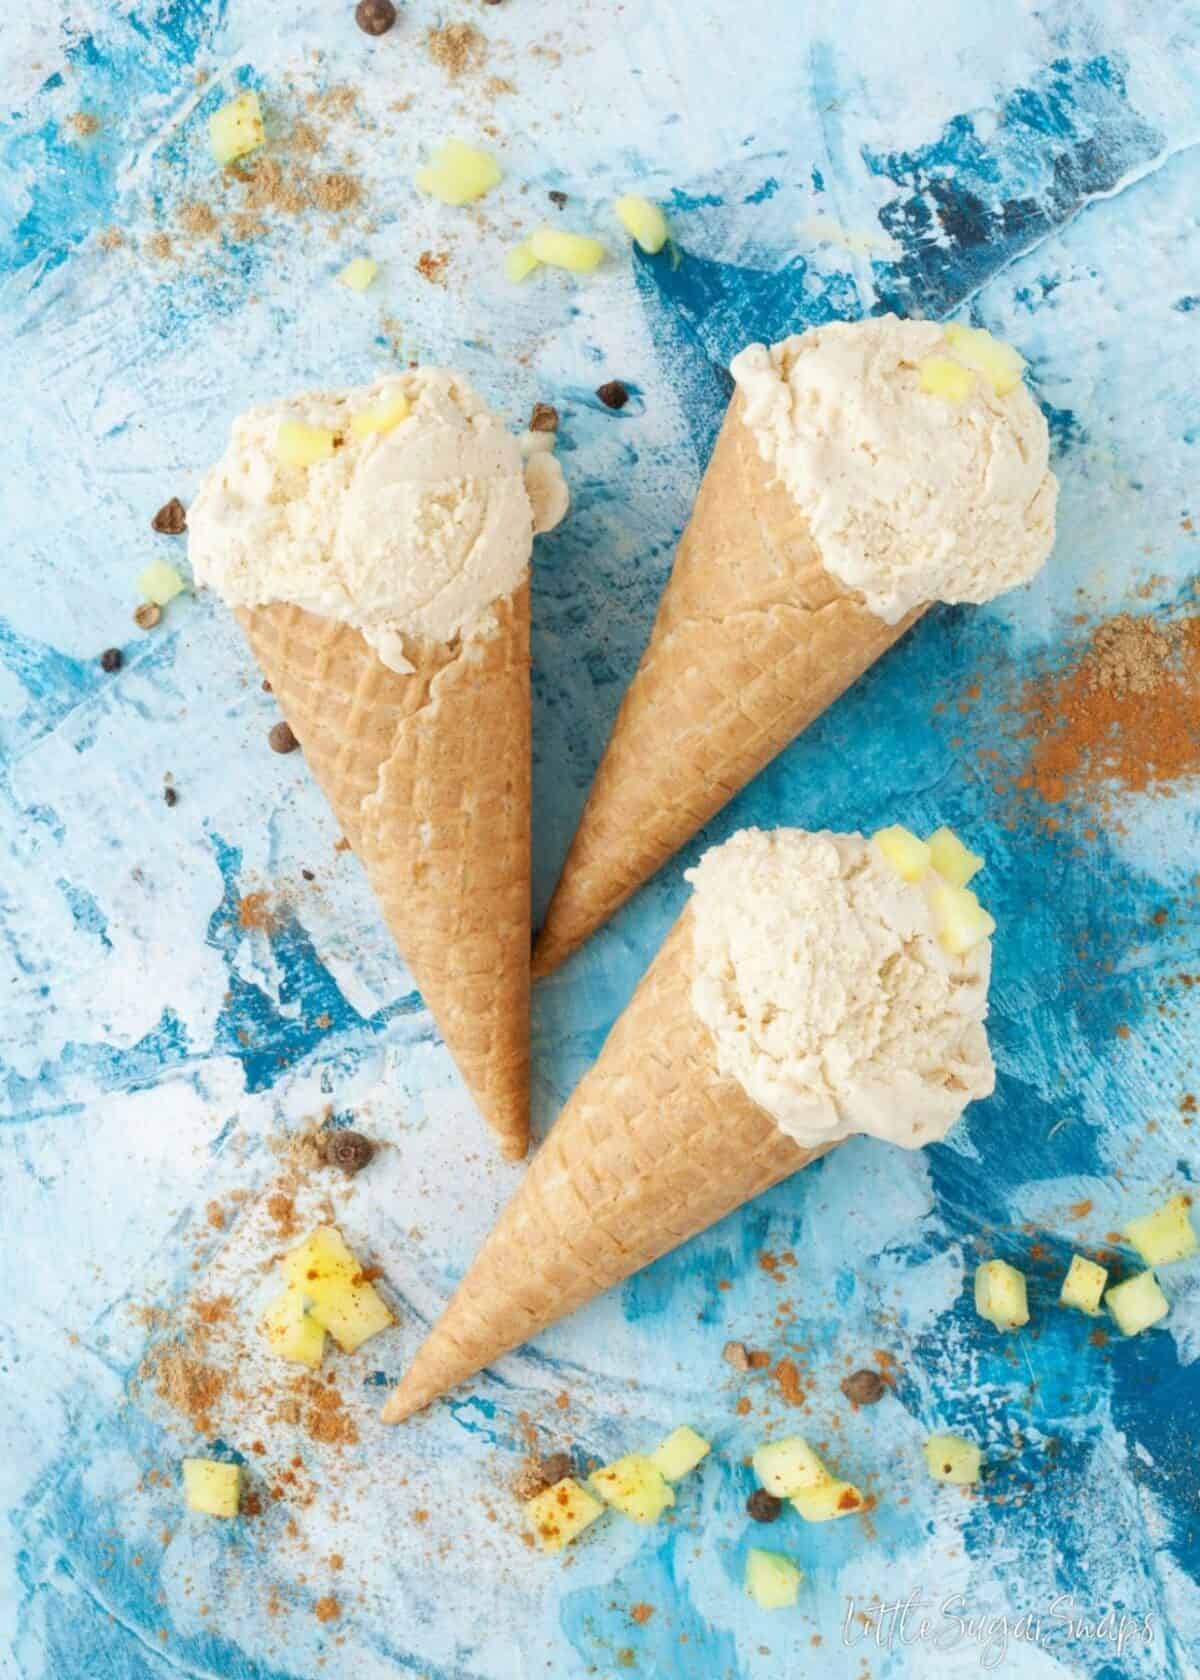 Roasted Pineapple Ice Cream in waffle cones against a blue background.